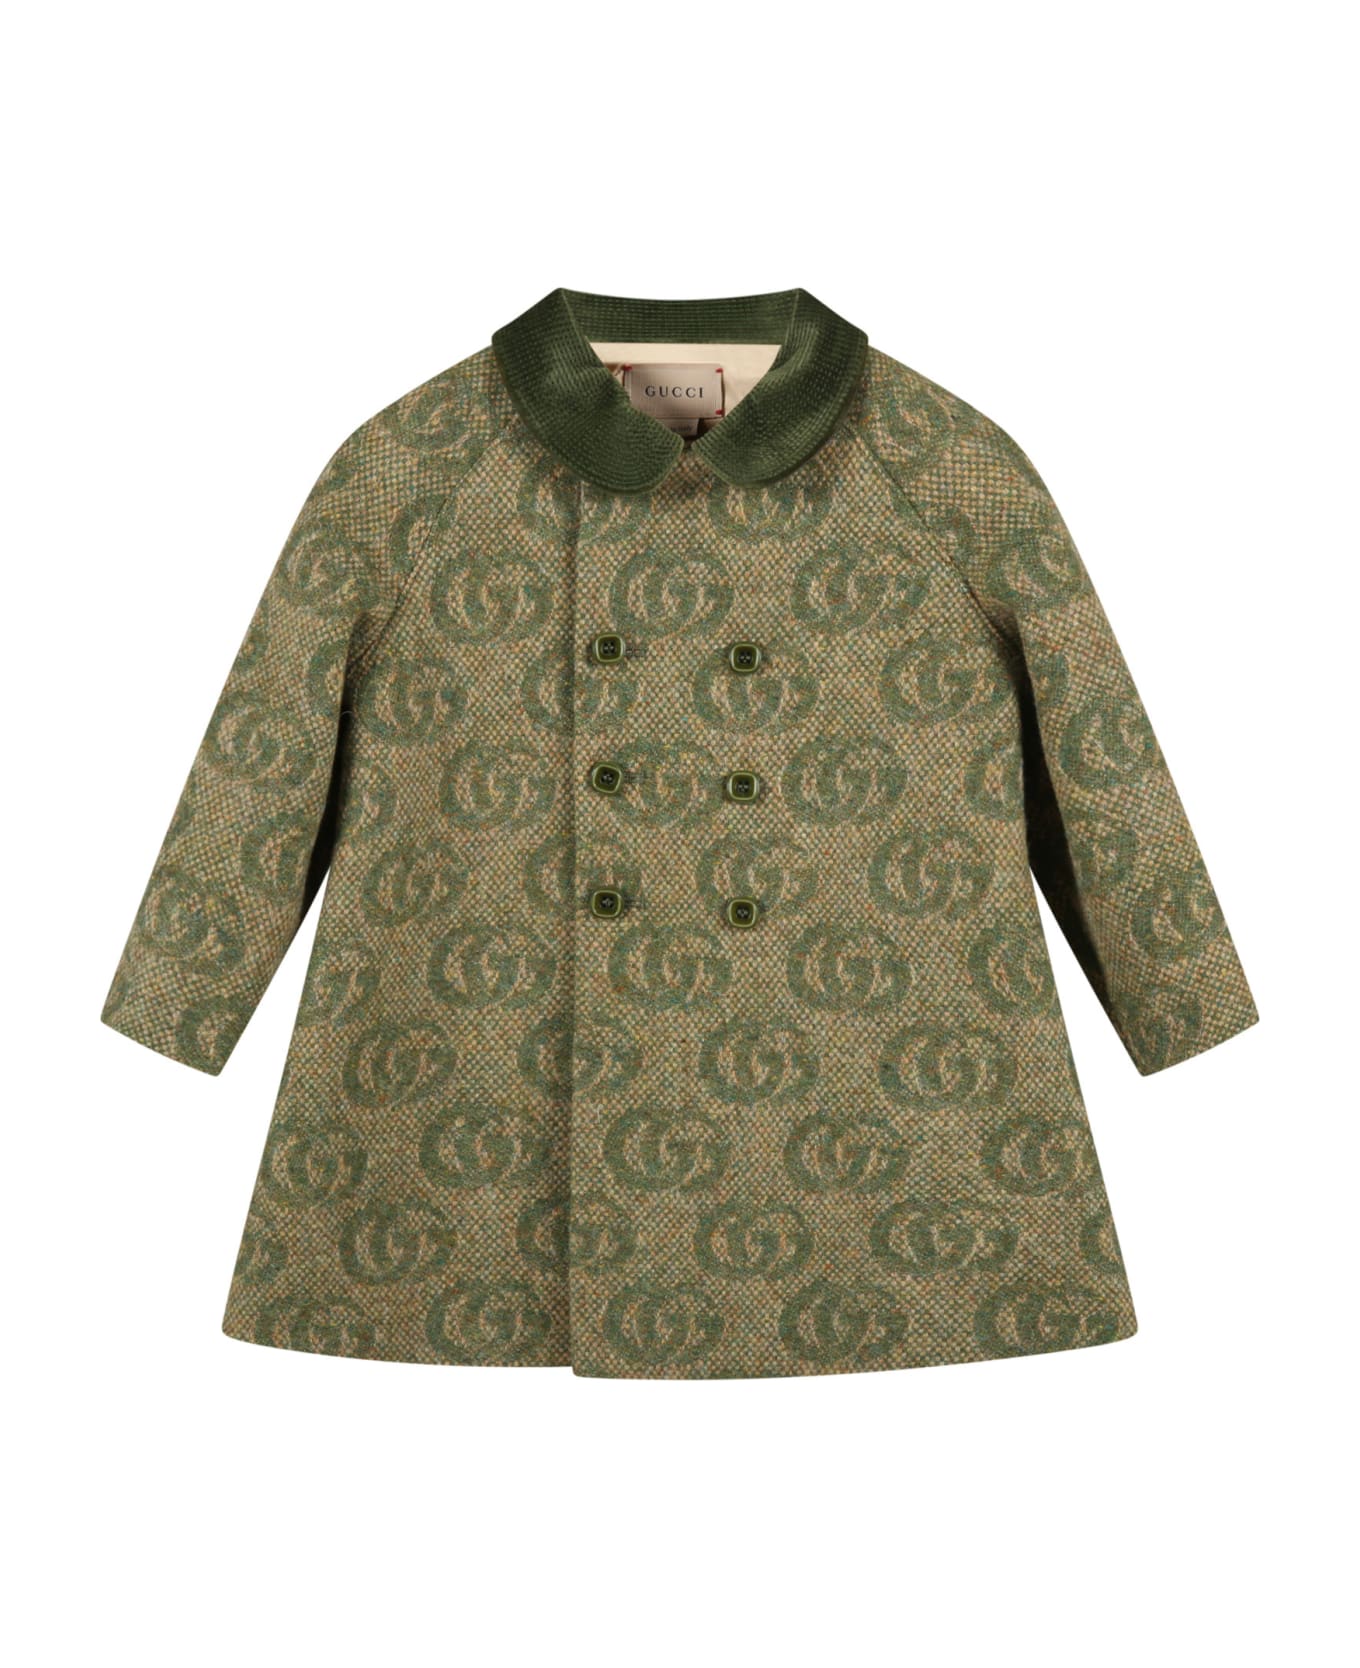 Gucci Green Coat For Baby Girl With Double Gg - Green